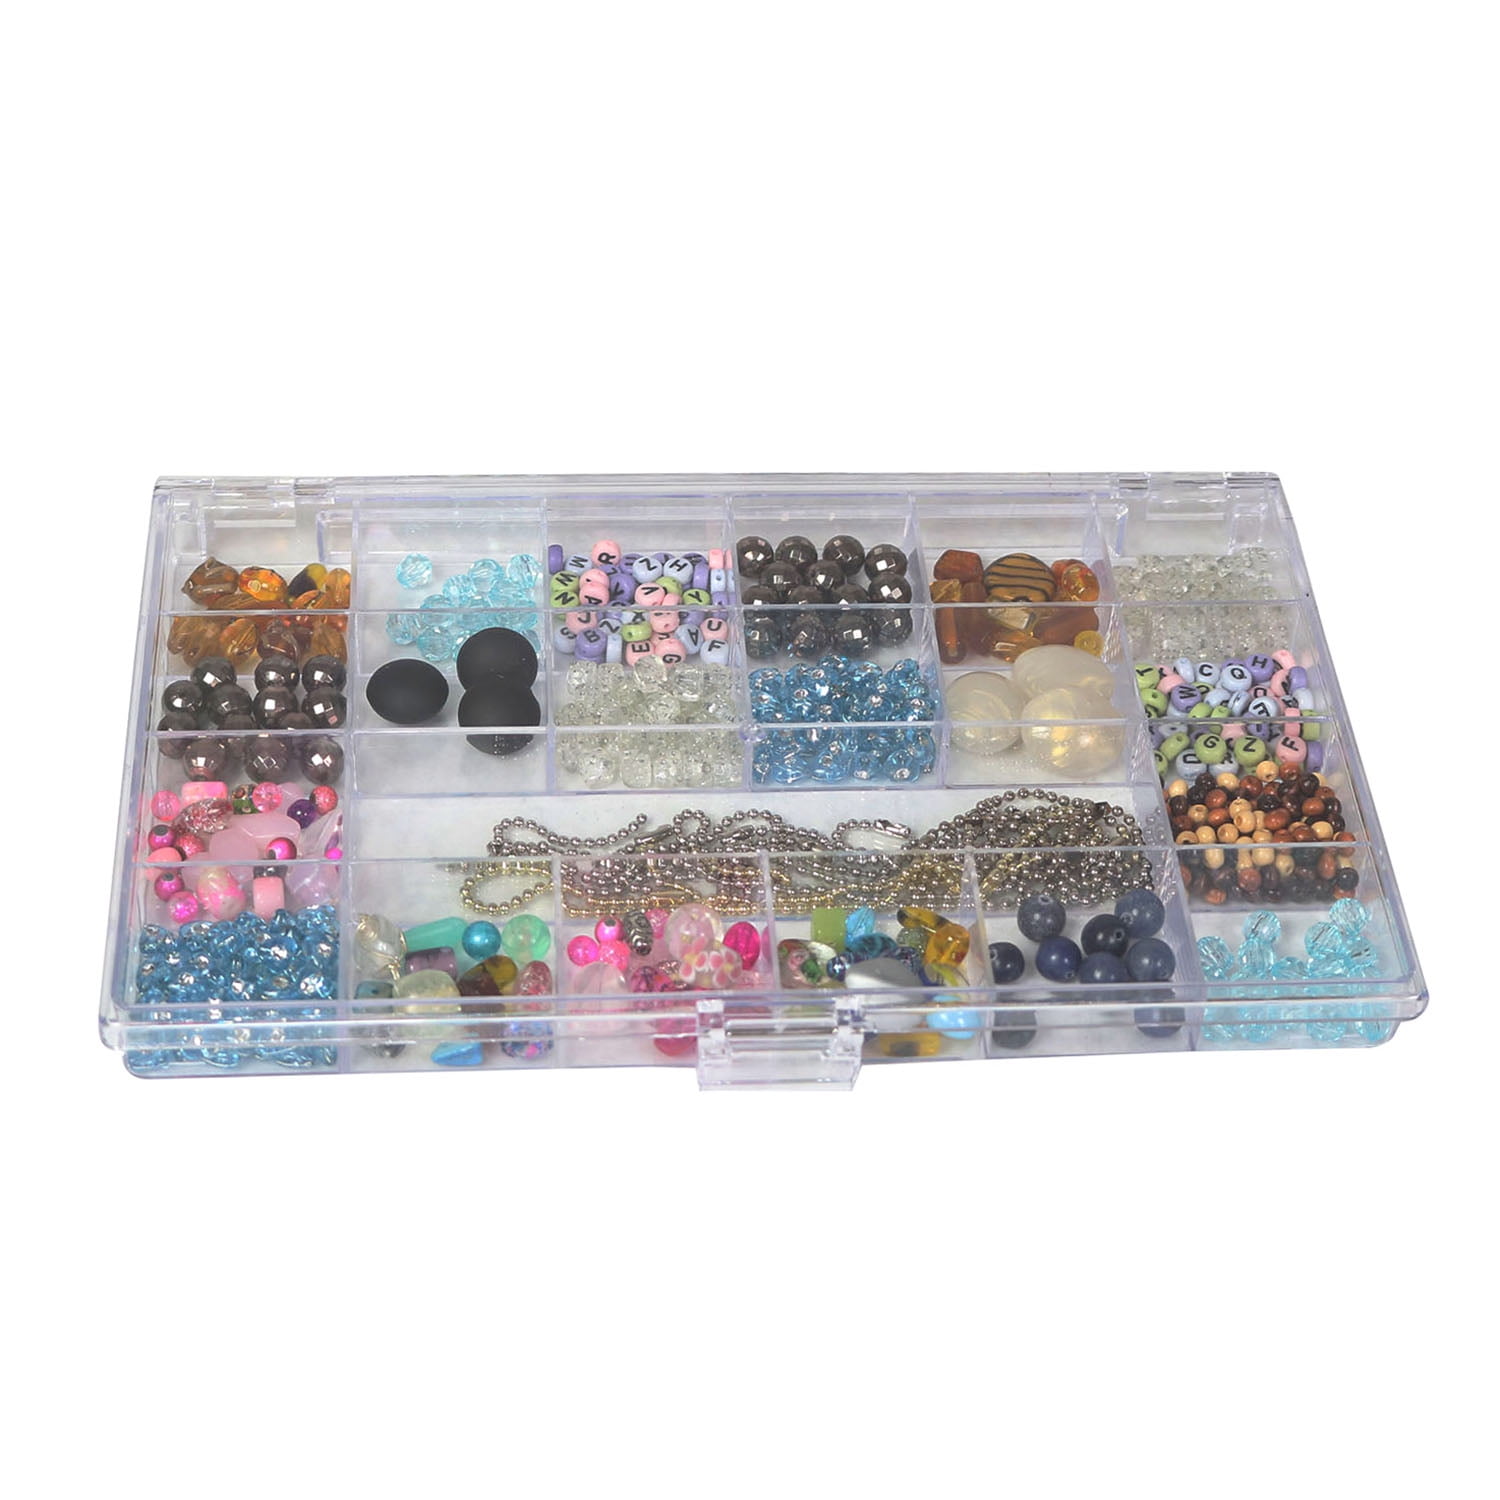 Bead Storage: the 3 most important things to look for - My World